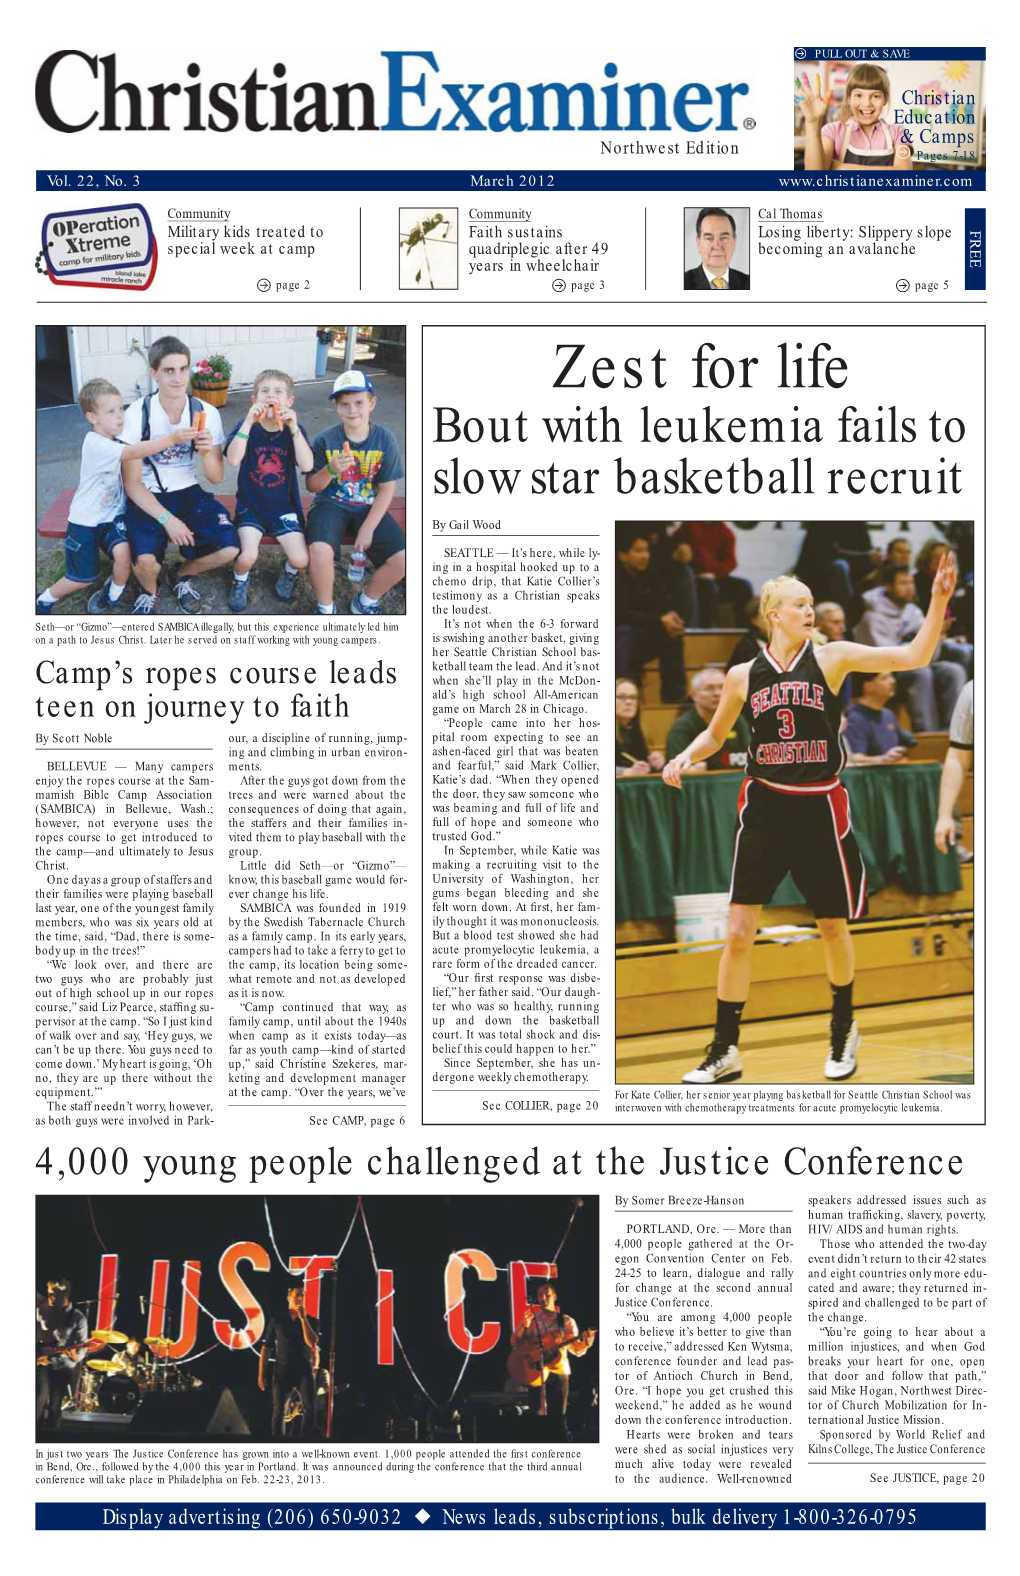 Zest for Life Bout with Leukemia Fails to Slow Star Basketball Recruit by Gail Wood